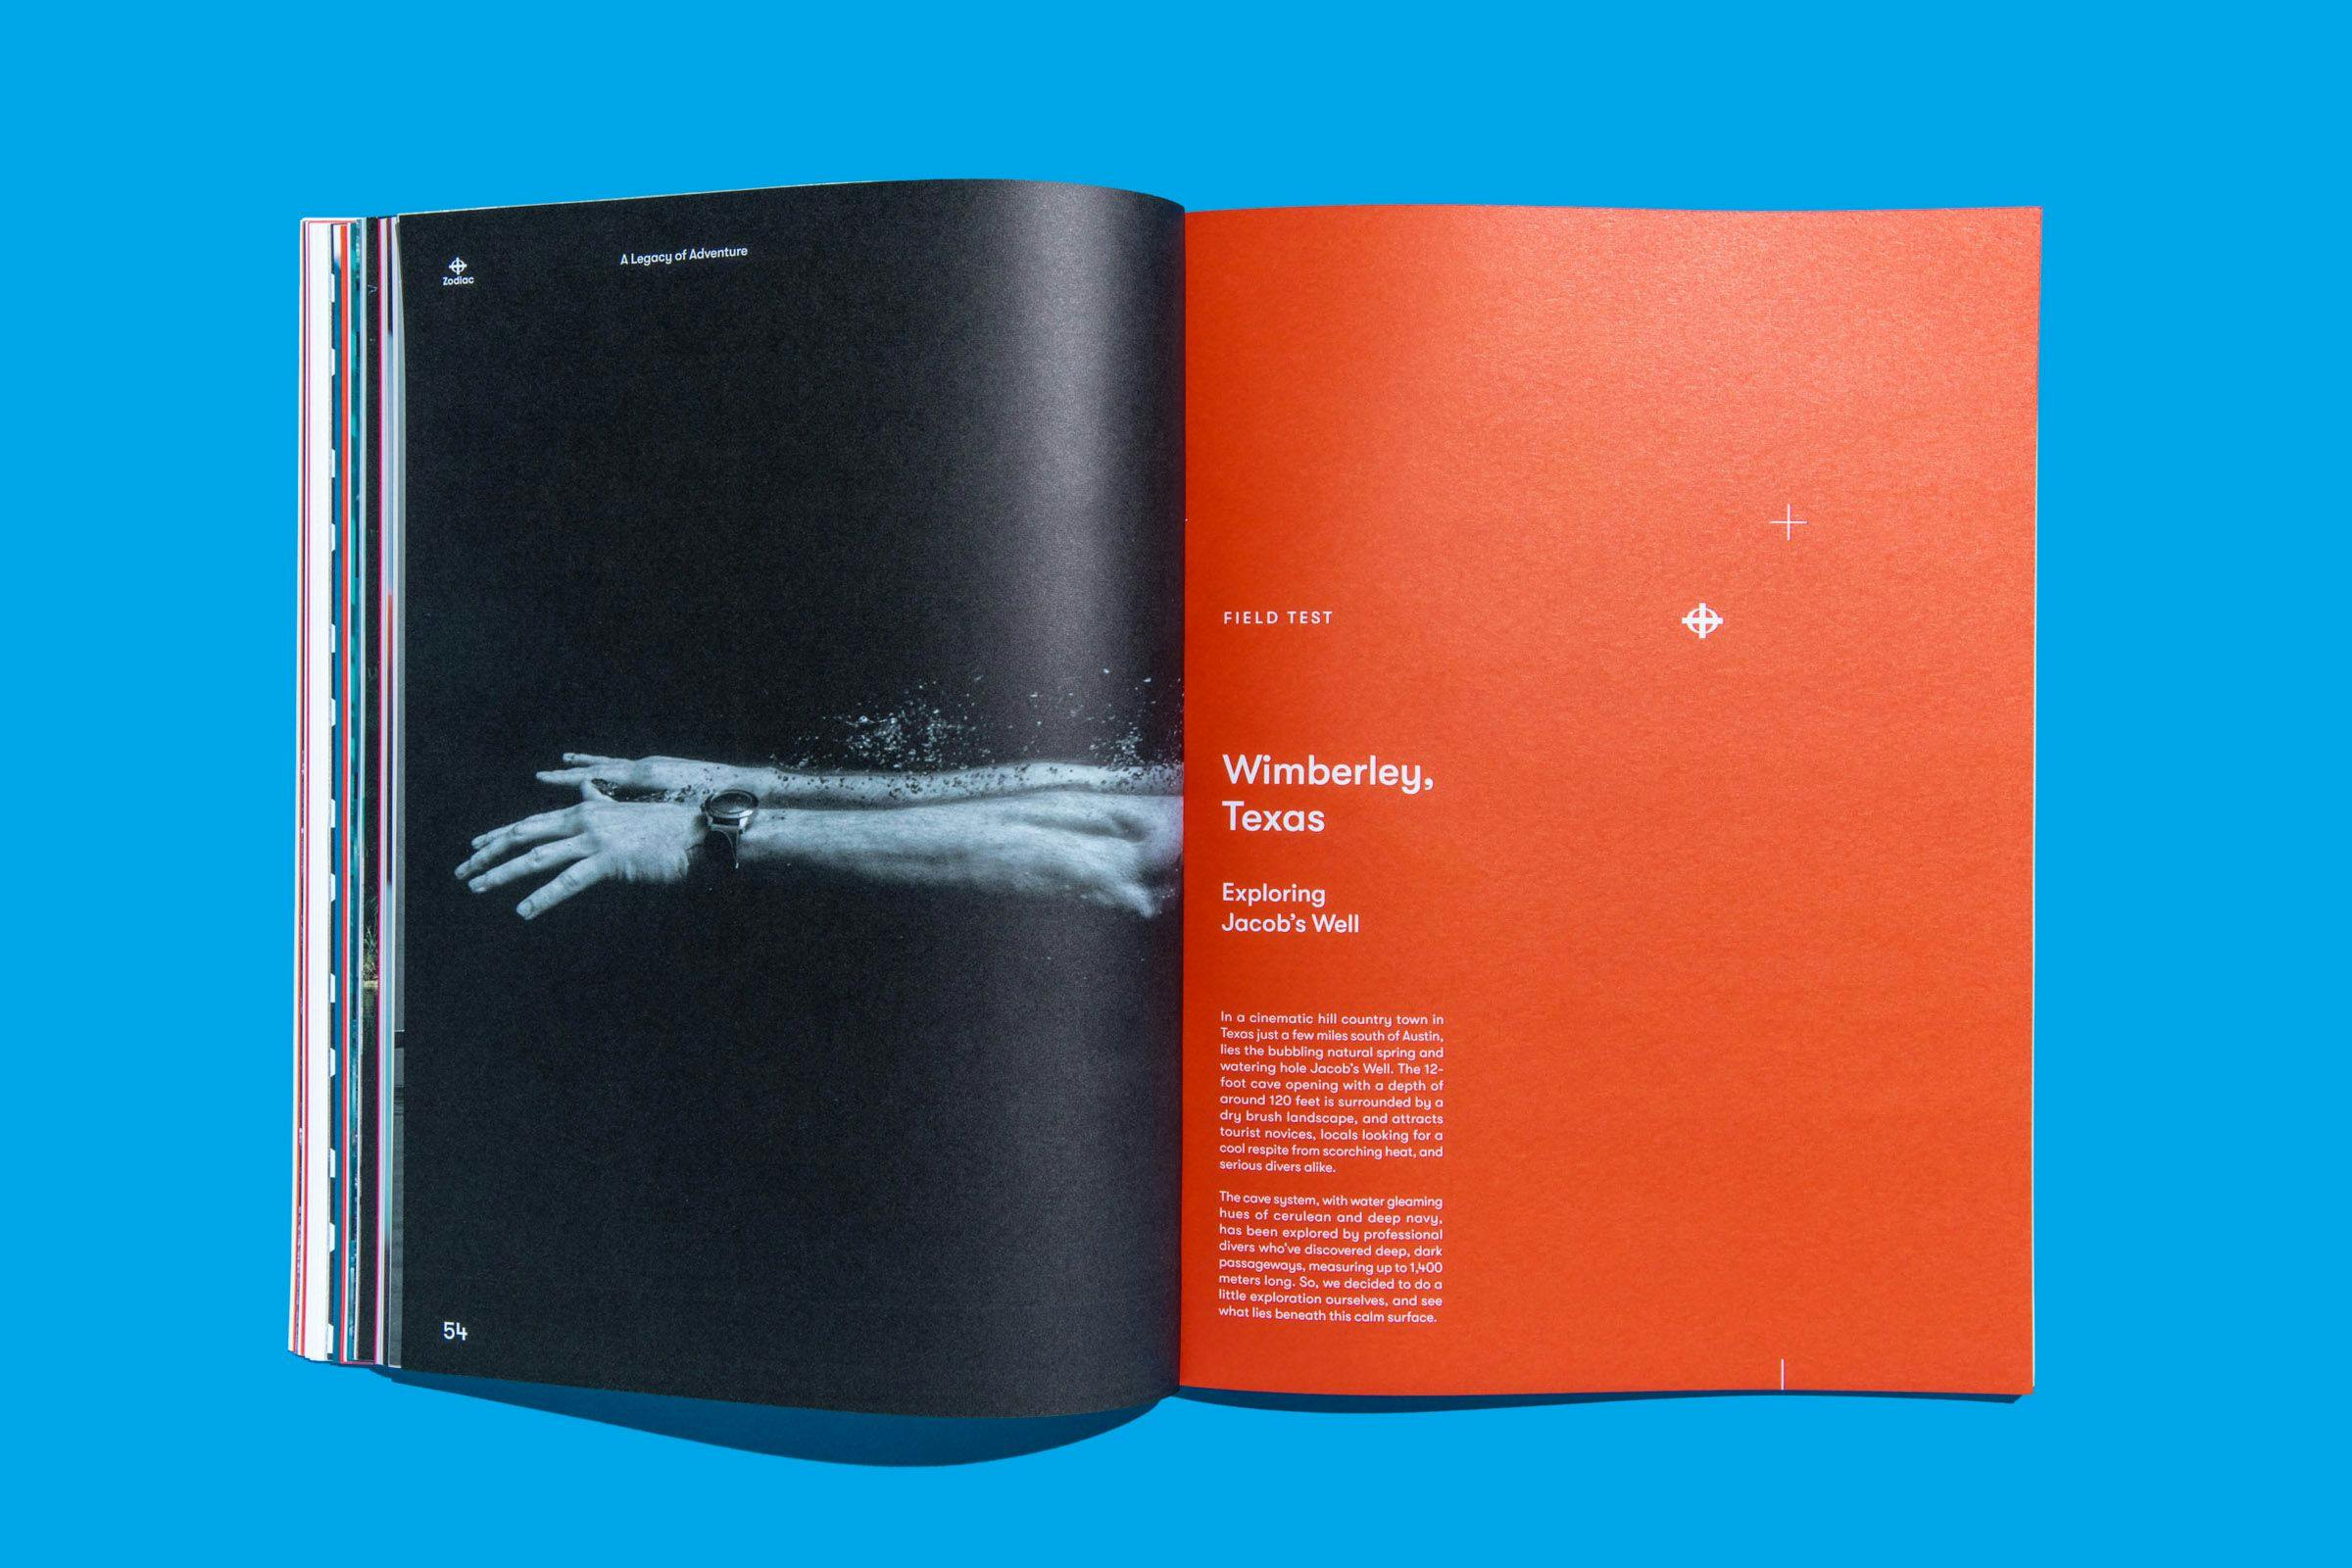 A vibrant orange page with text and a photo of someone reaching out from the Zodiac Watches: Brand Book